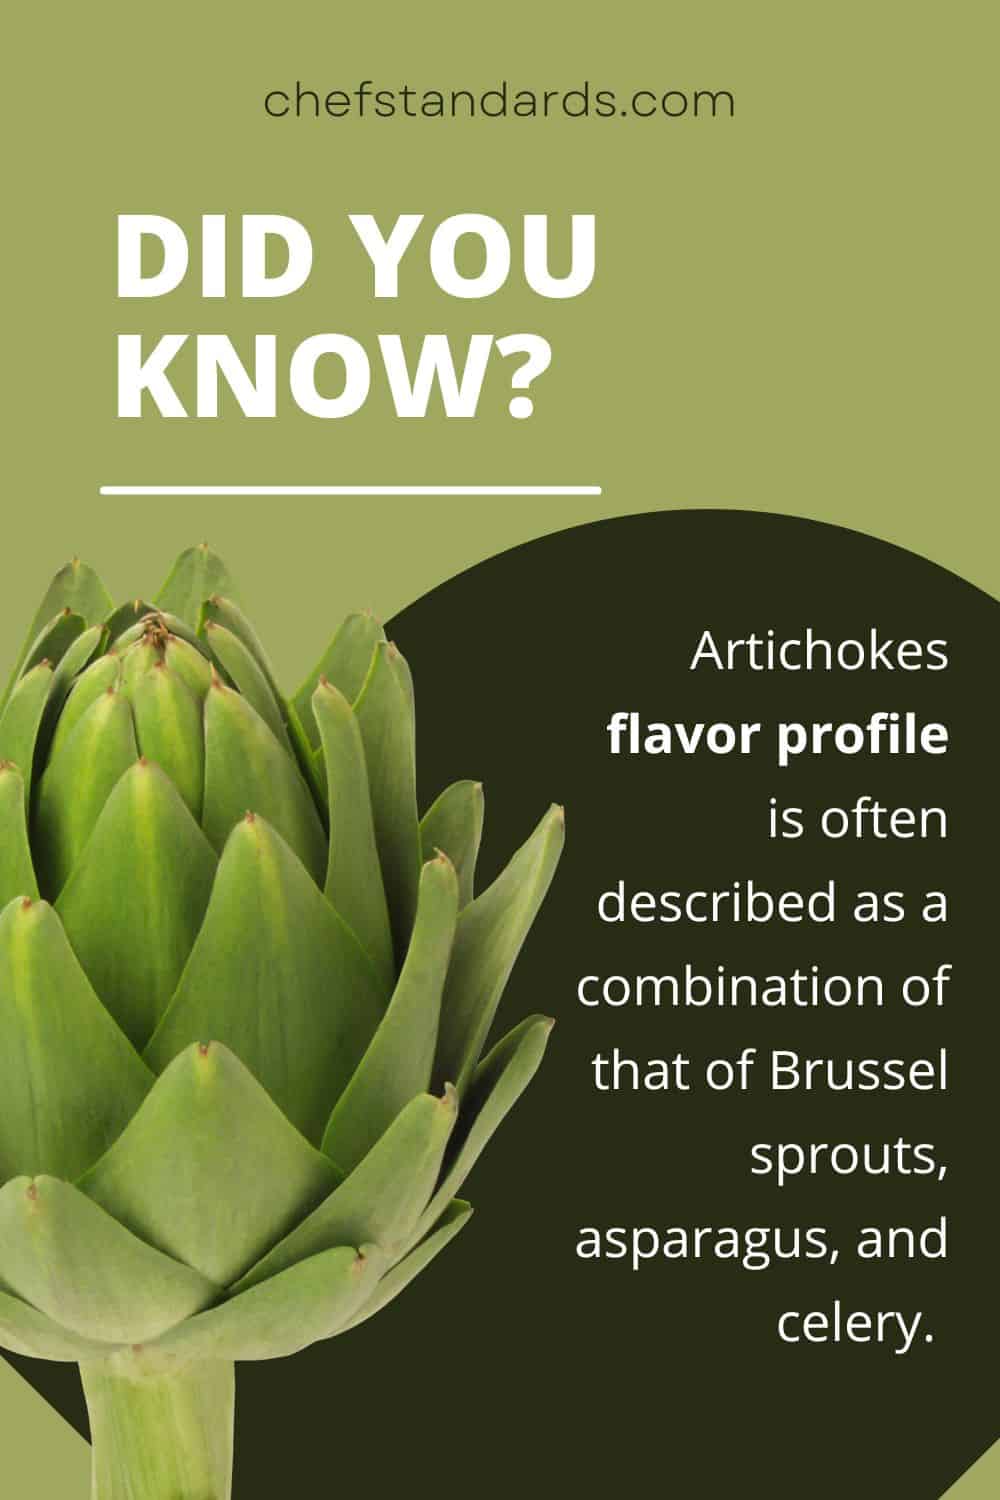 did you know about the Artichokes